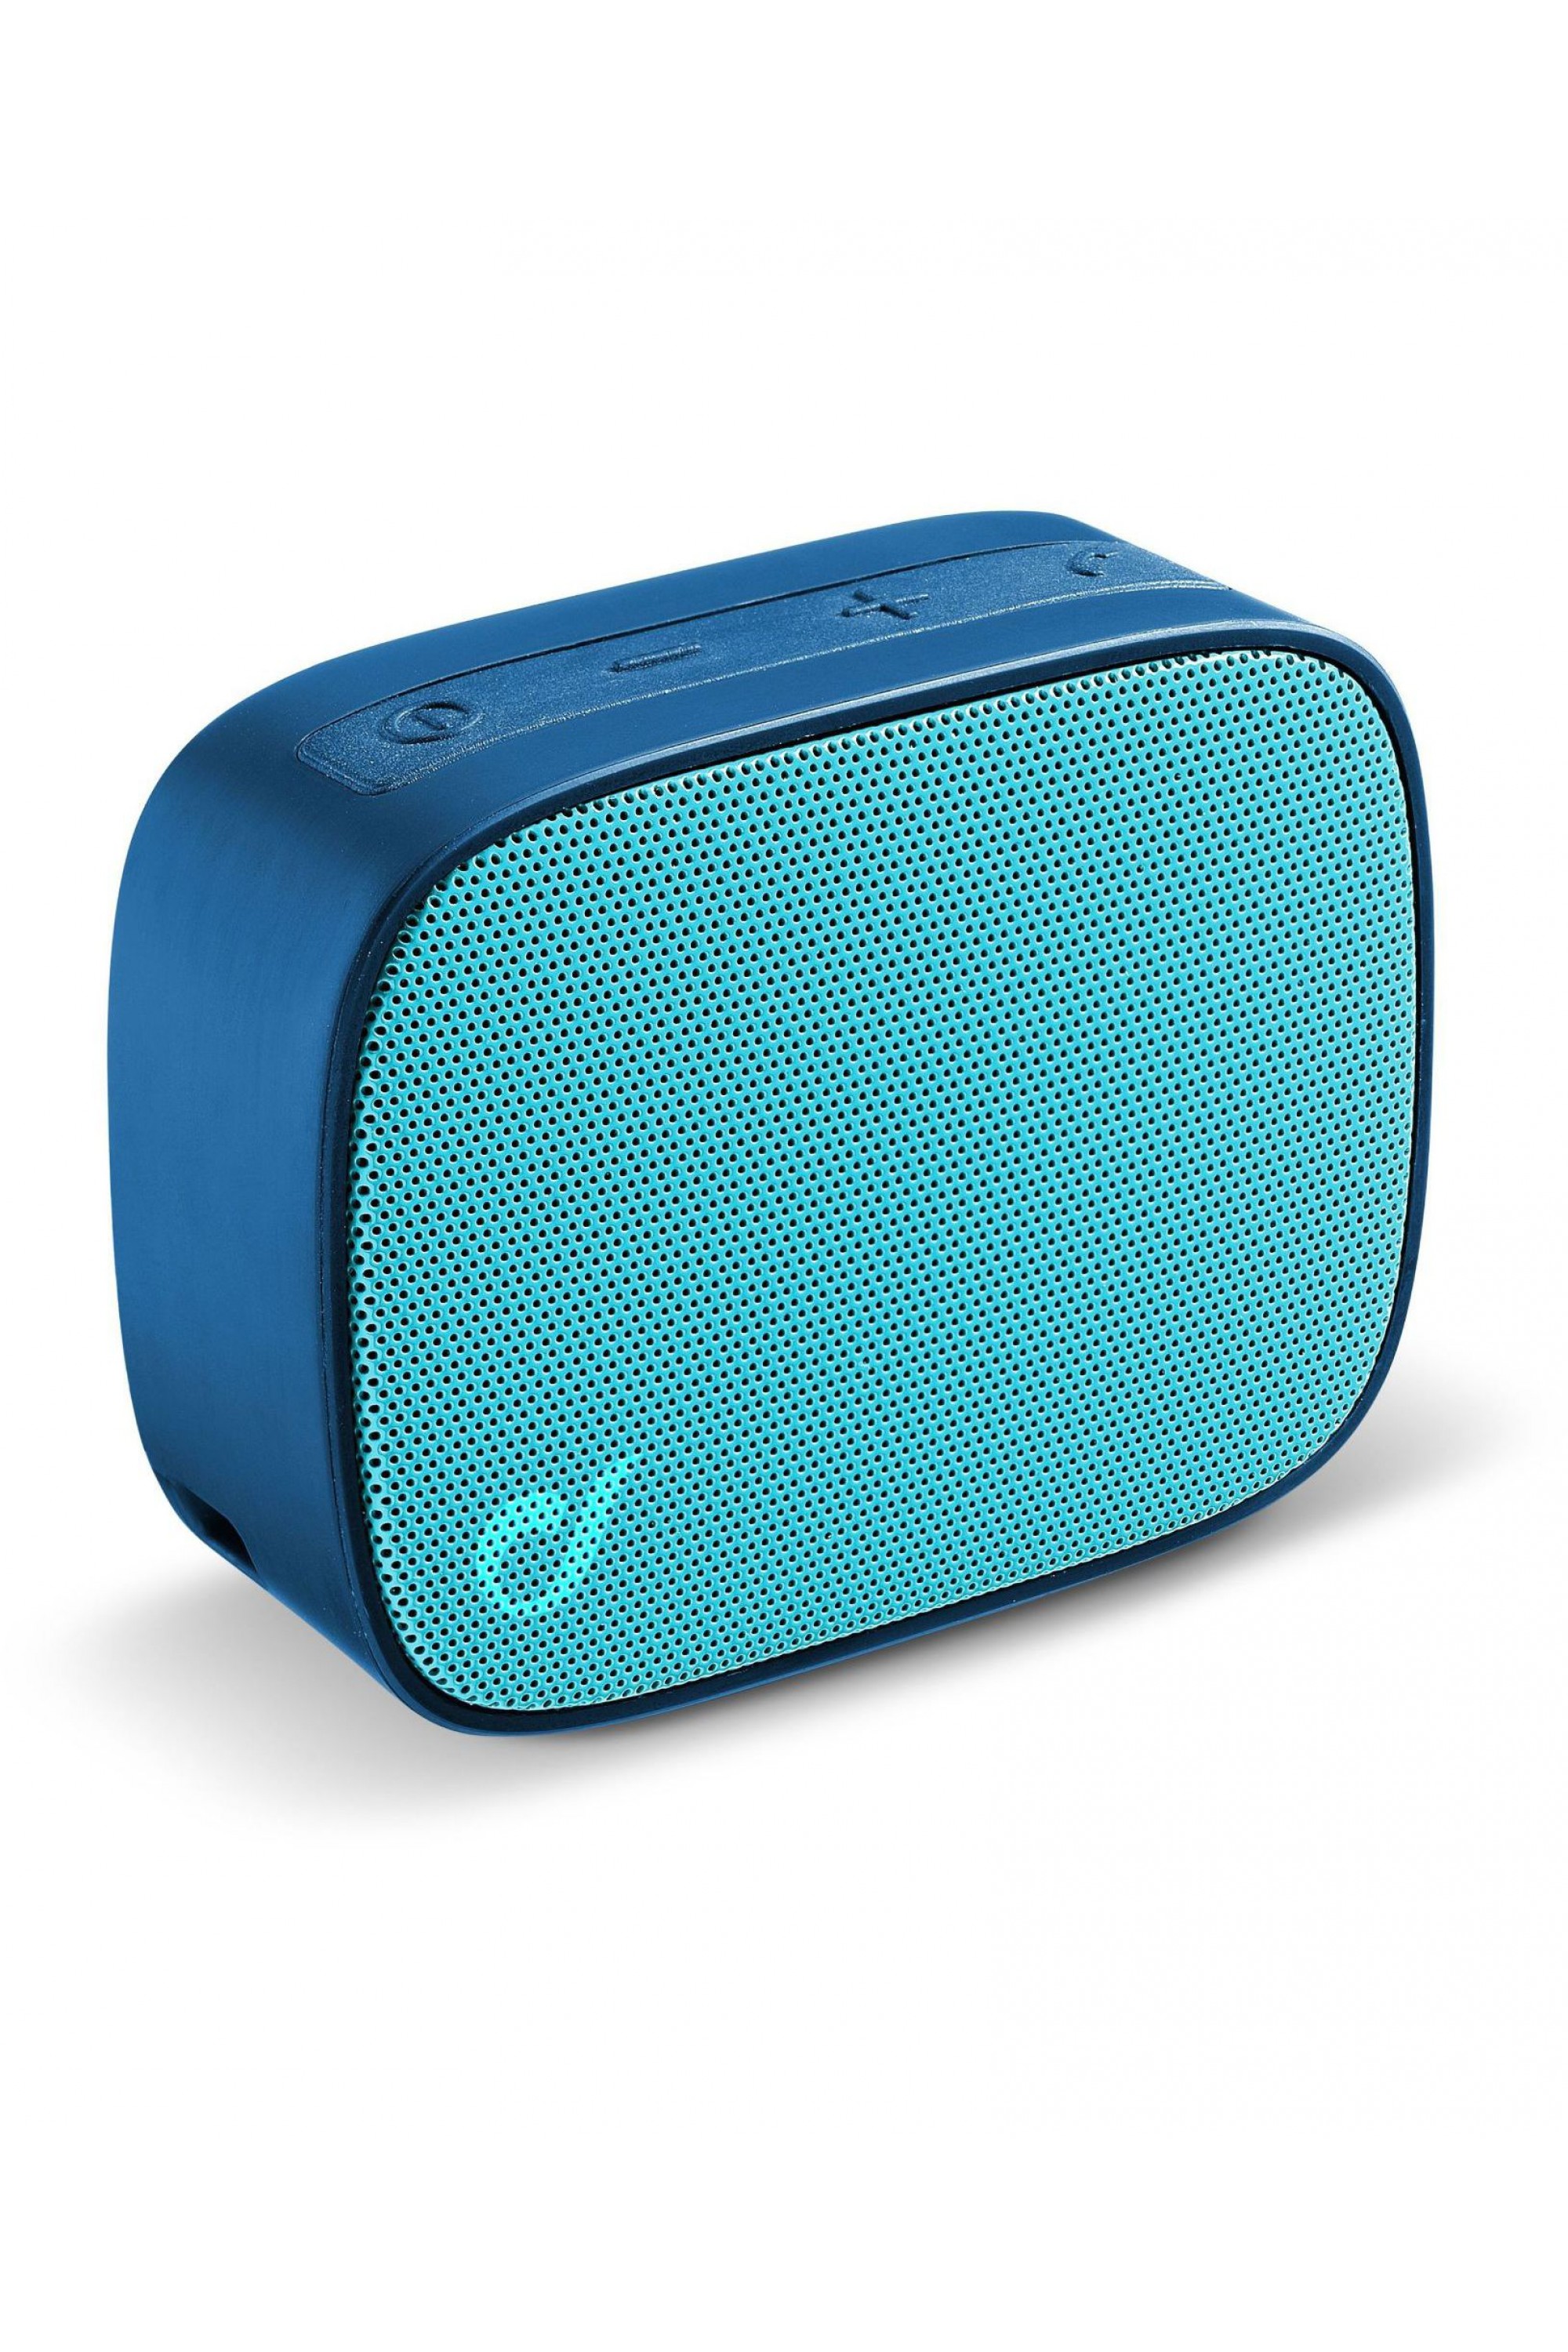 Bluetooth Speakers Portable Cellularline Fizzy Turquoise |